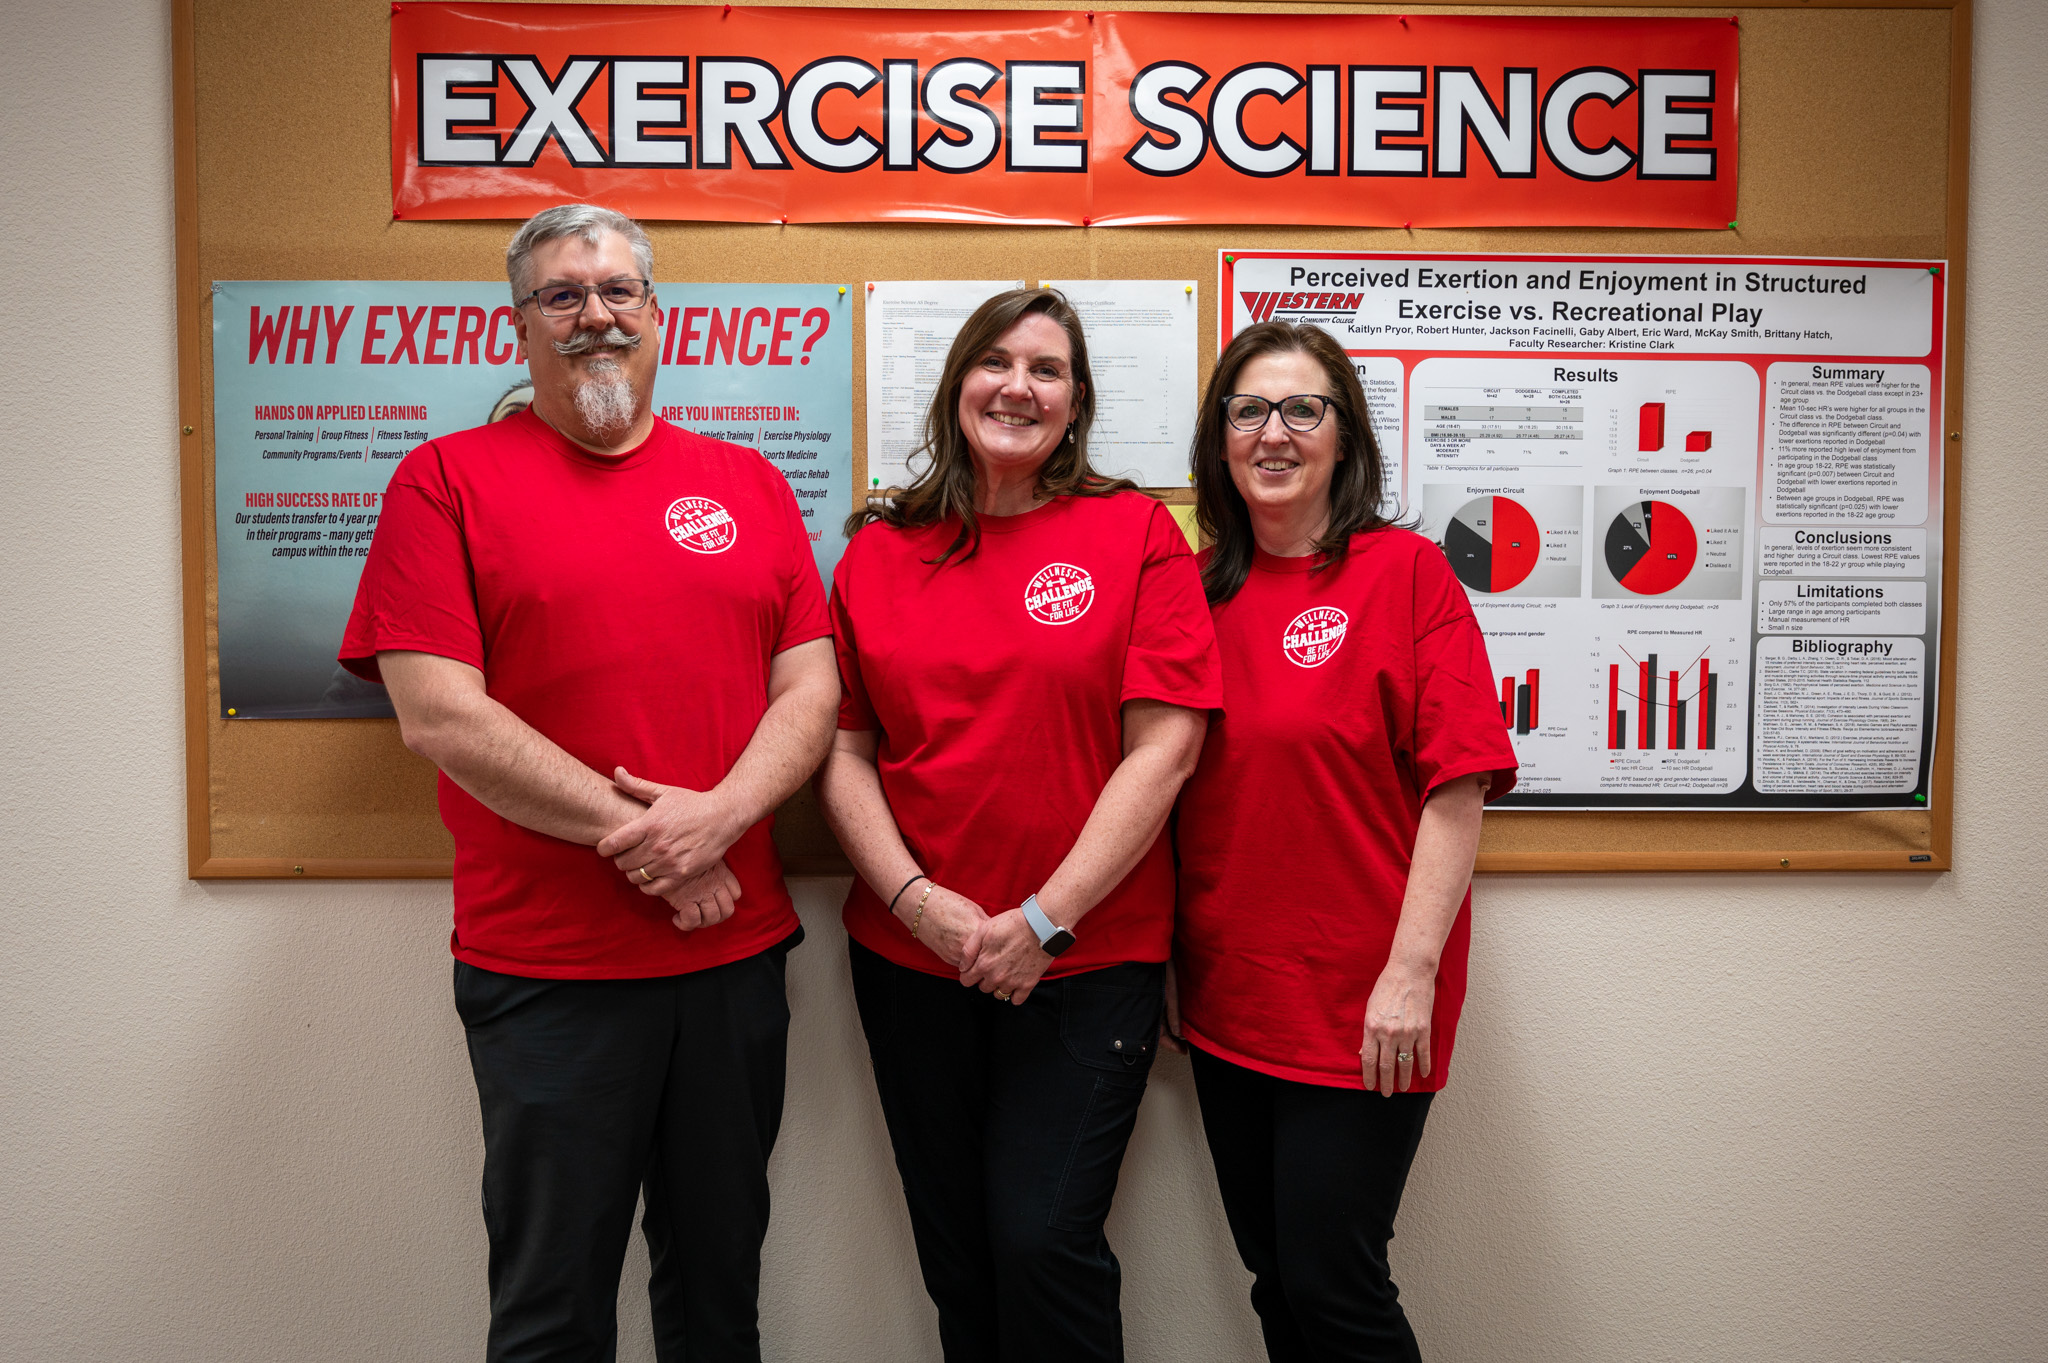 Members of the team include from left to right: Jim Wasseen, Eva Wasseen, and Dianna Davis 